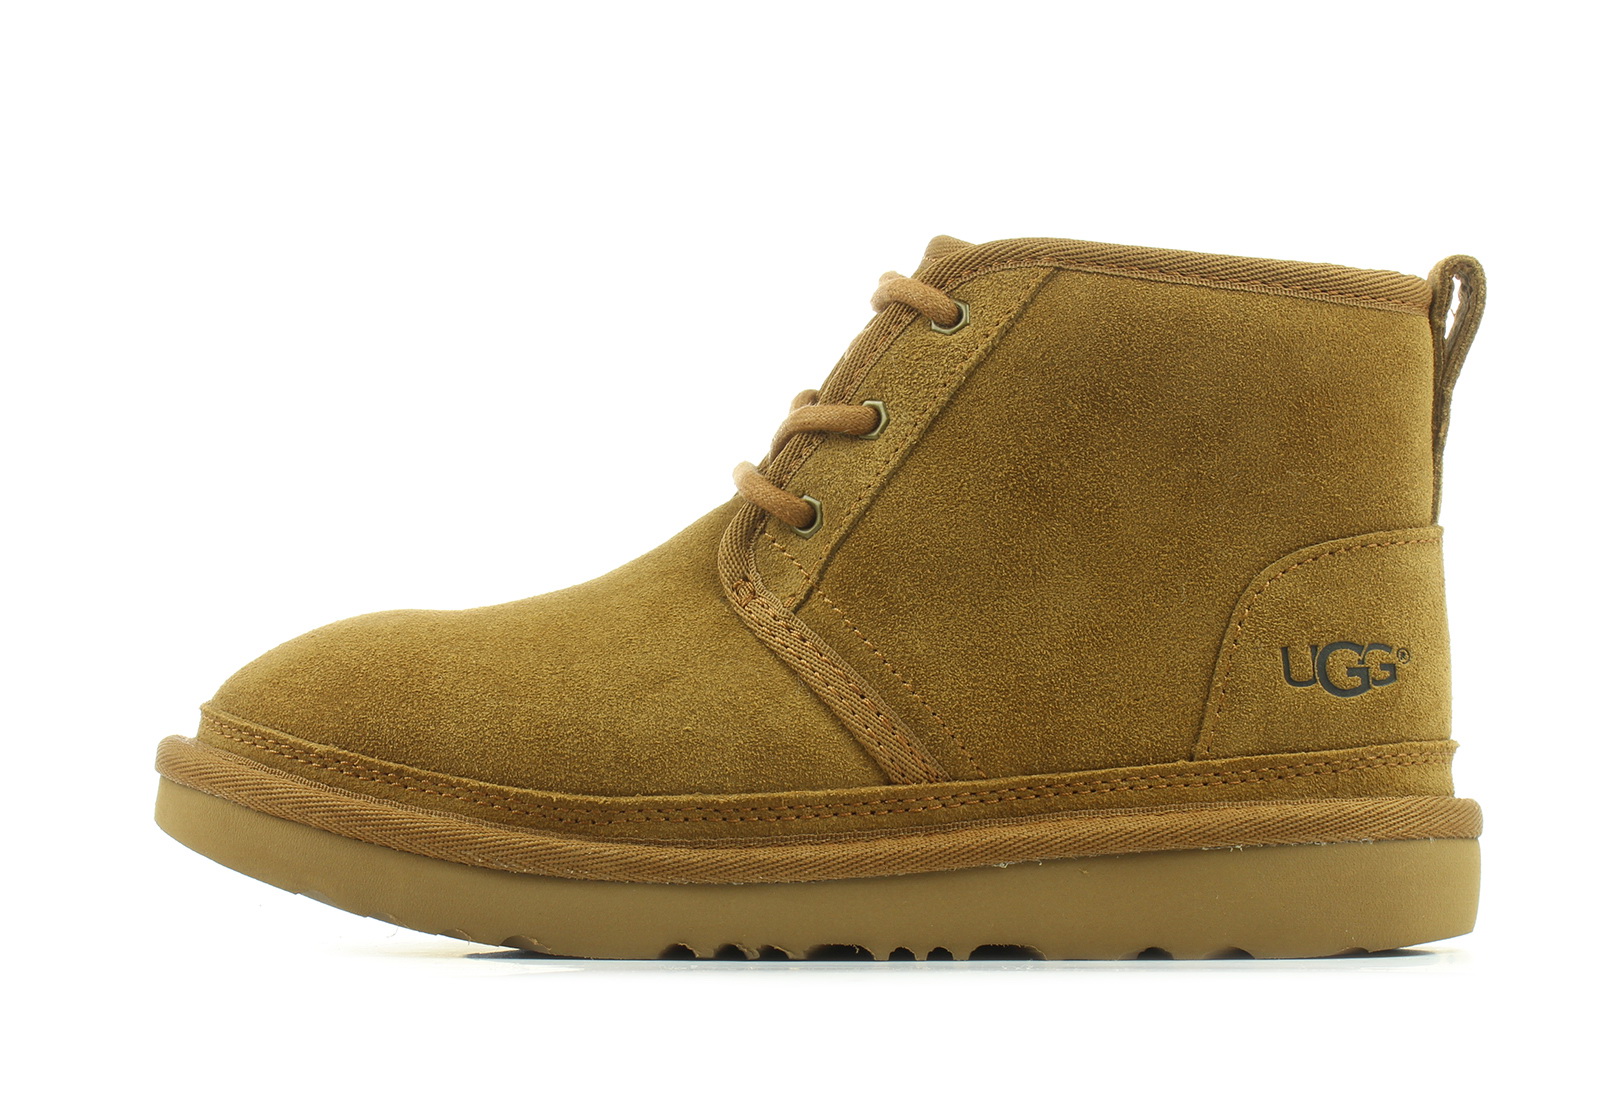 UGG High shoes - Neumel II - 1017320K-che - Online shop for sneakers